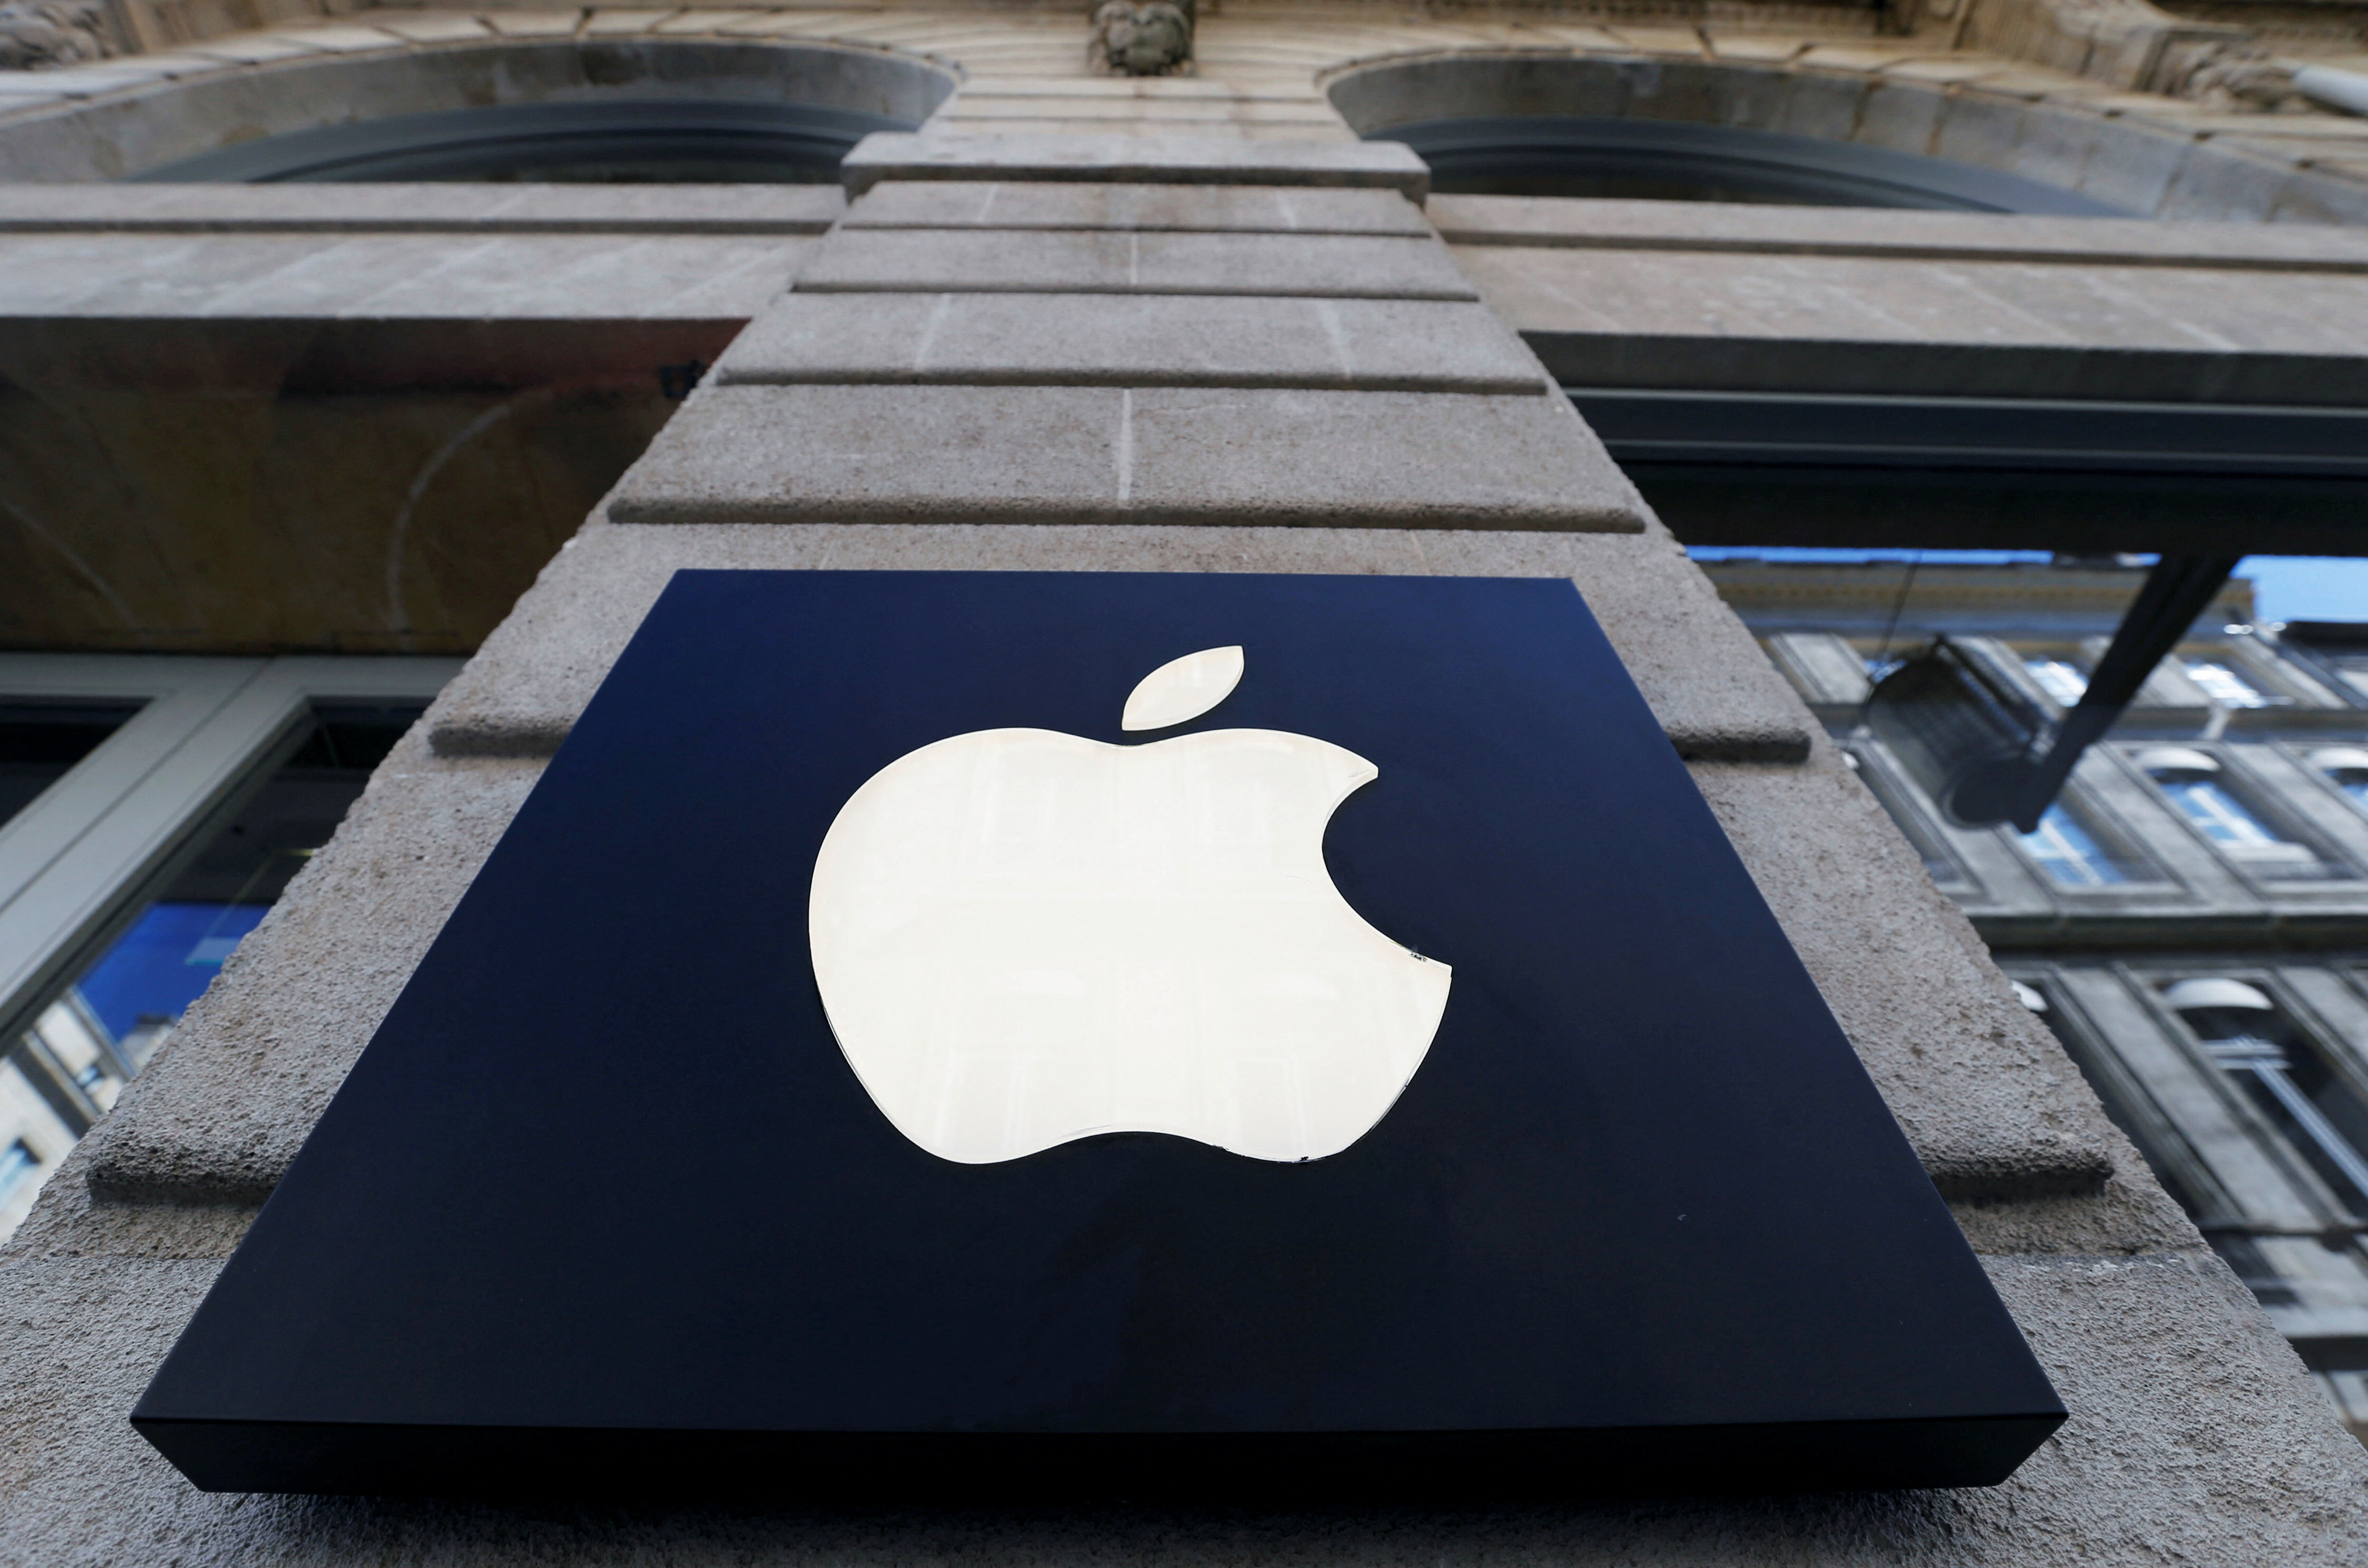 The logo of the Apple company is seen outside the Apple store in Bordeaux